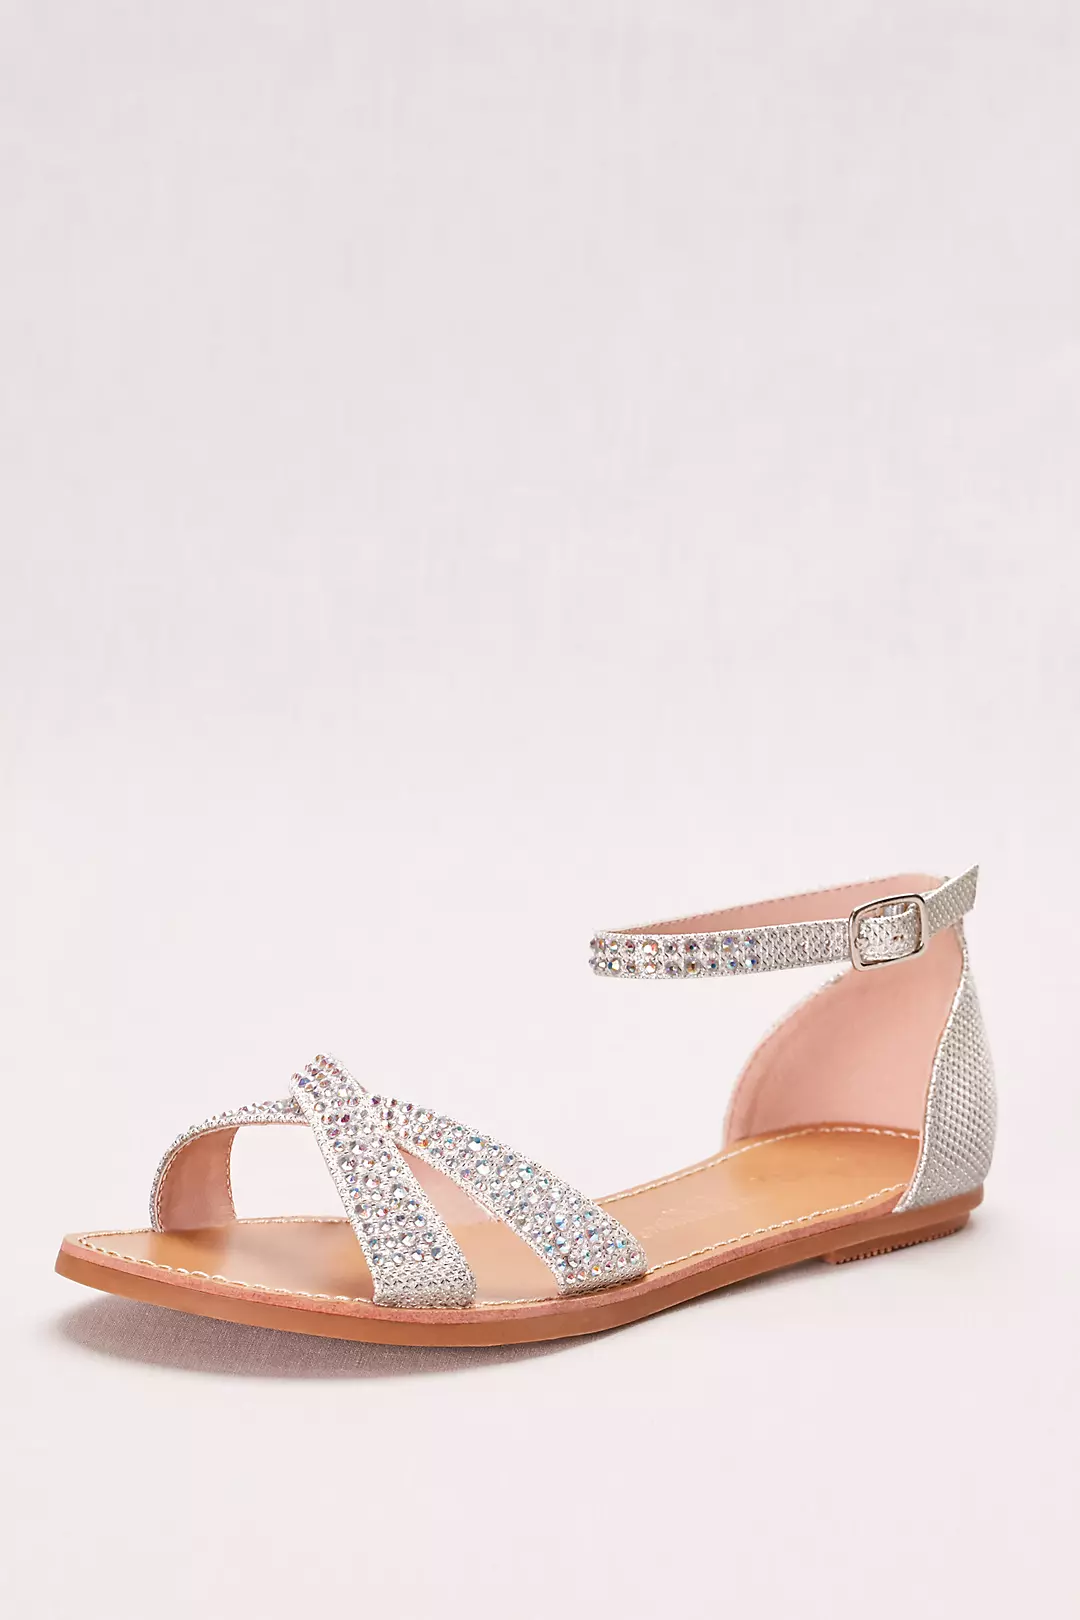 Crisscross Flat Sandal with Crystals Image